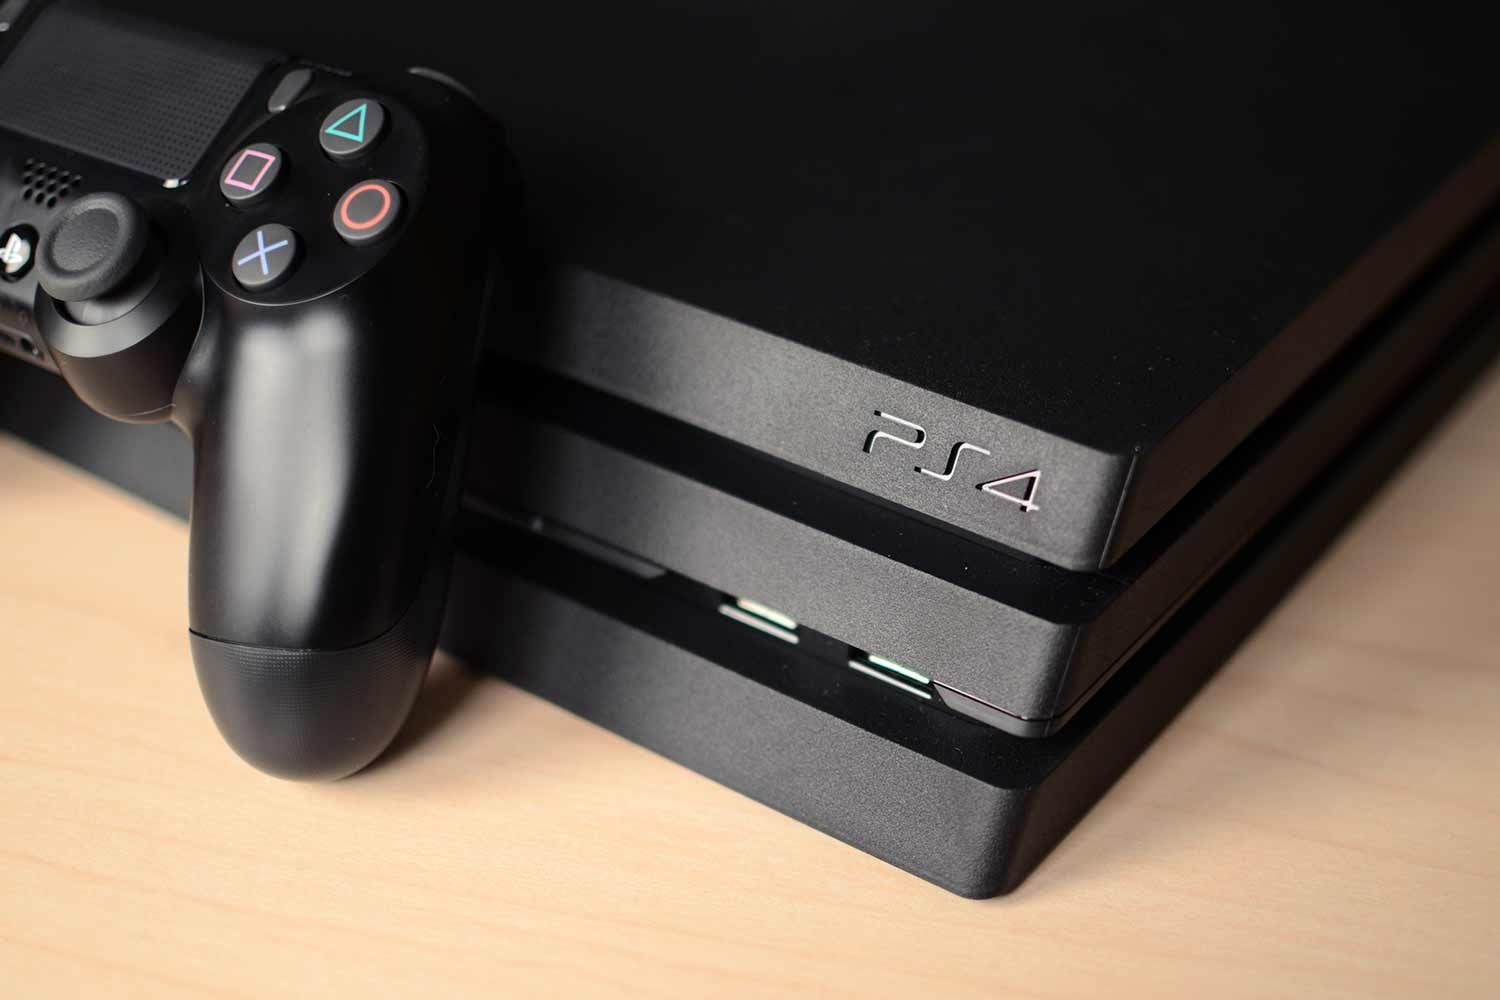 A PS4 firmware 6.20 exploit is in the works - NotebookCheck.net News